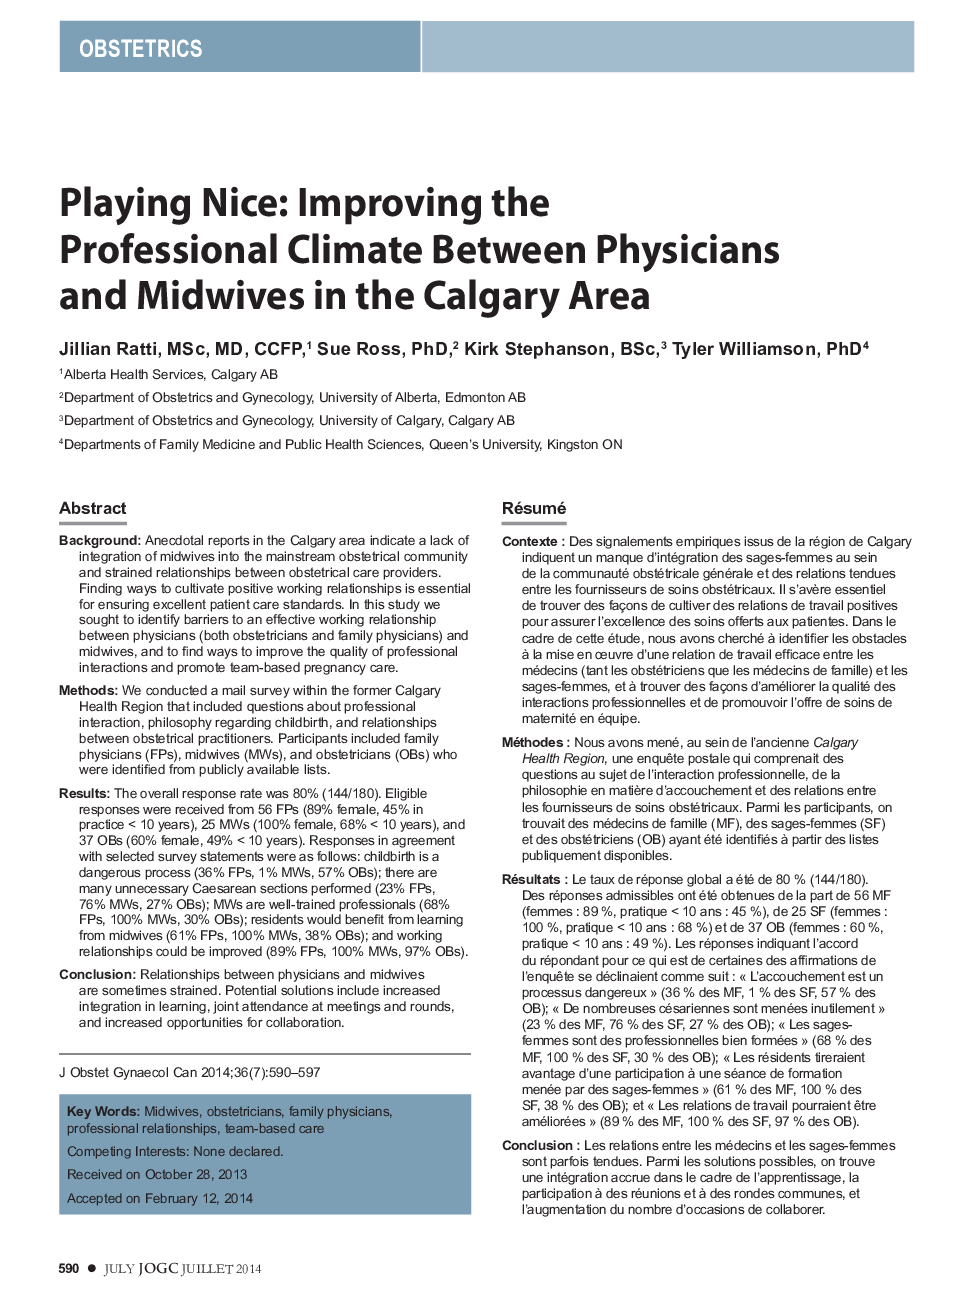 Playing Nice: Improving the Professional Climate Between Physicians and Midwives in the Calgary Area